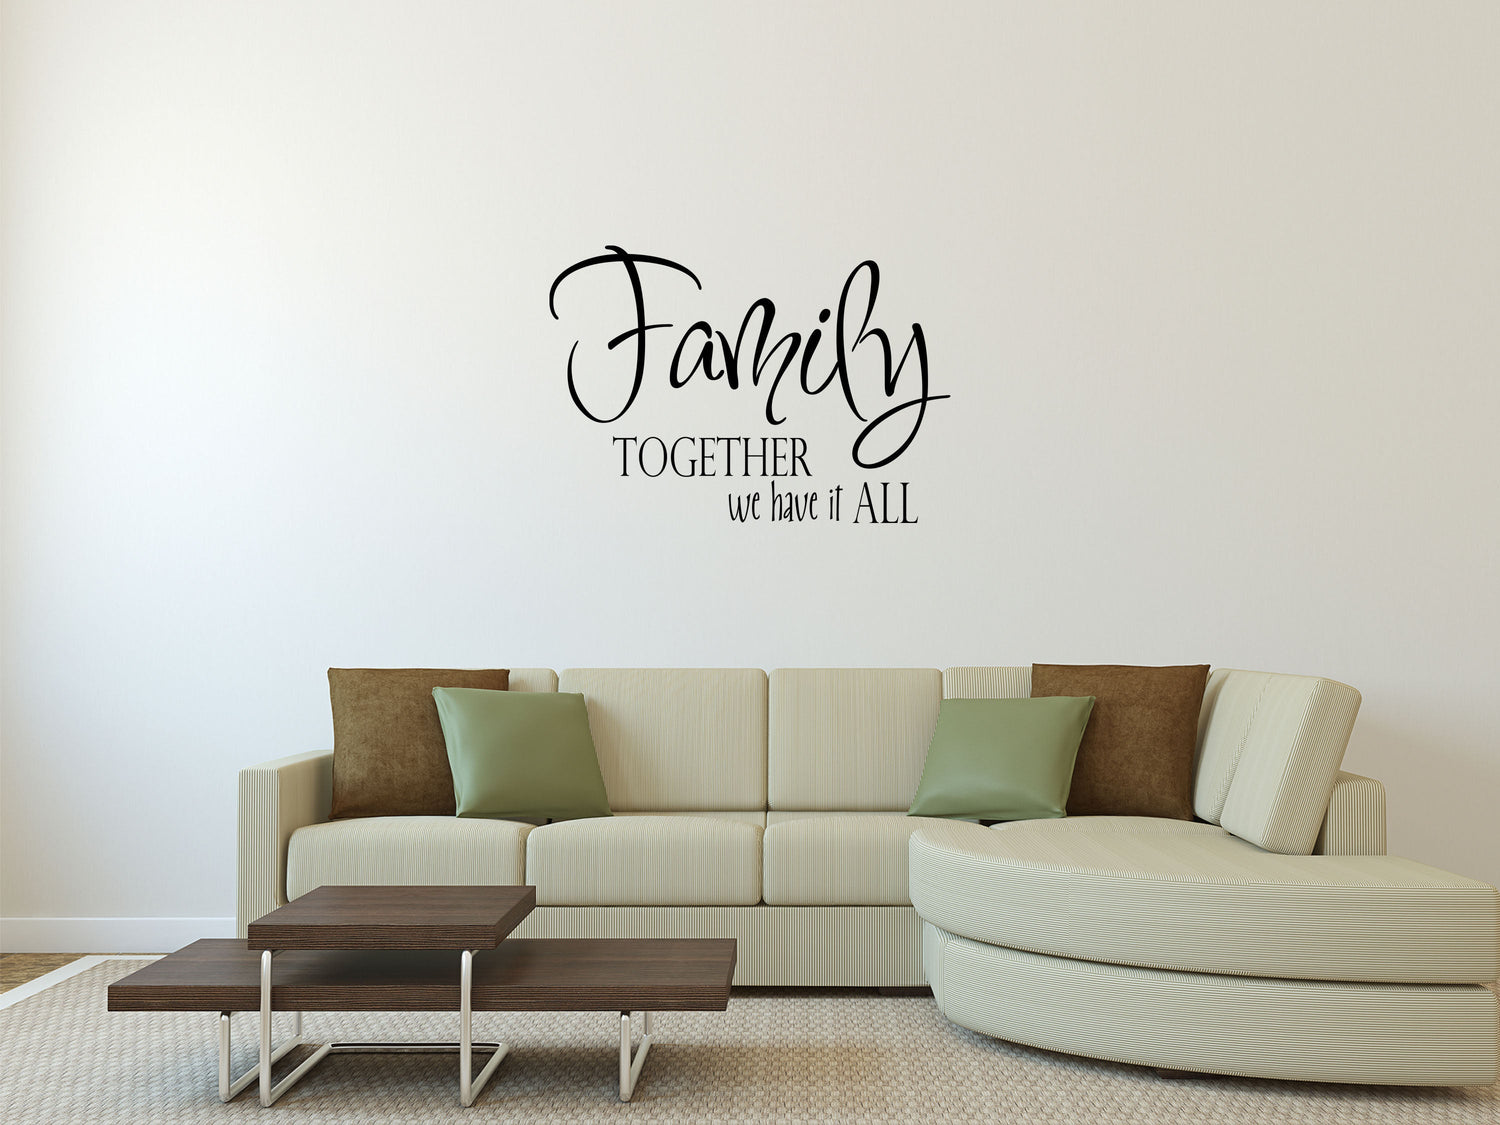 Family Together - Inspirational Wall Decals Vinyl Wall Decal Inspirational Wall Signs 